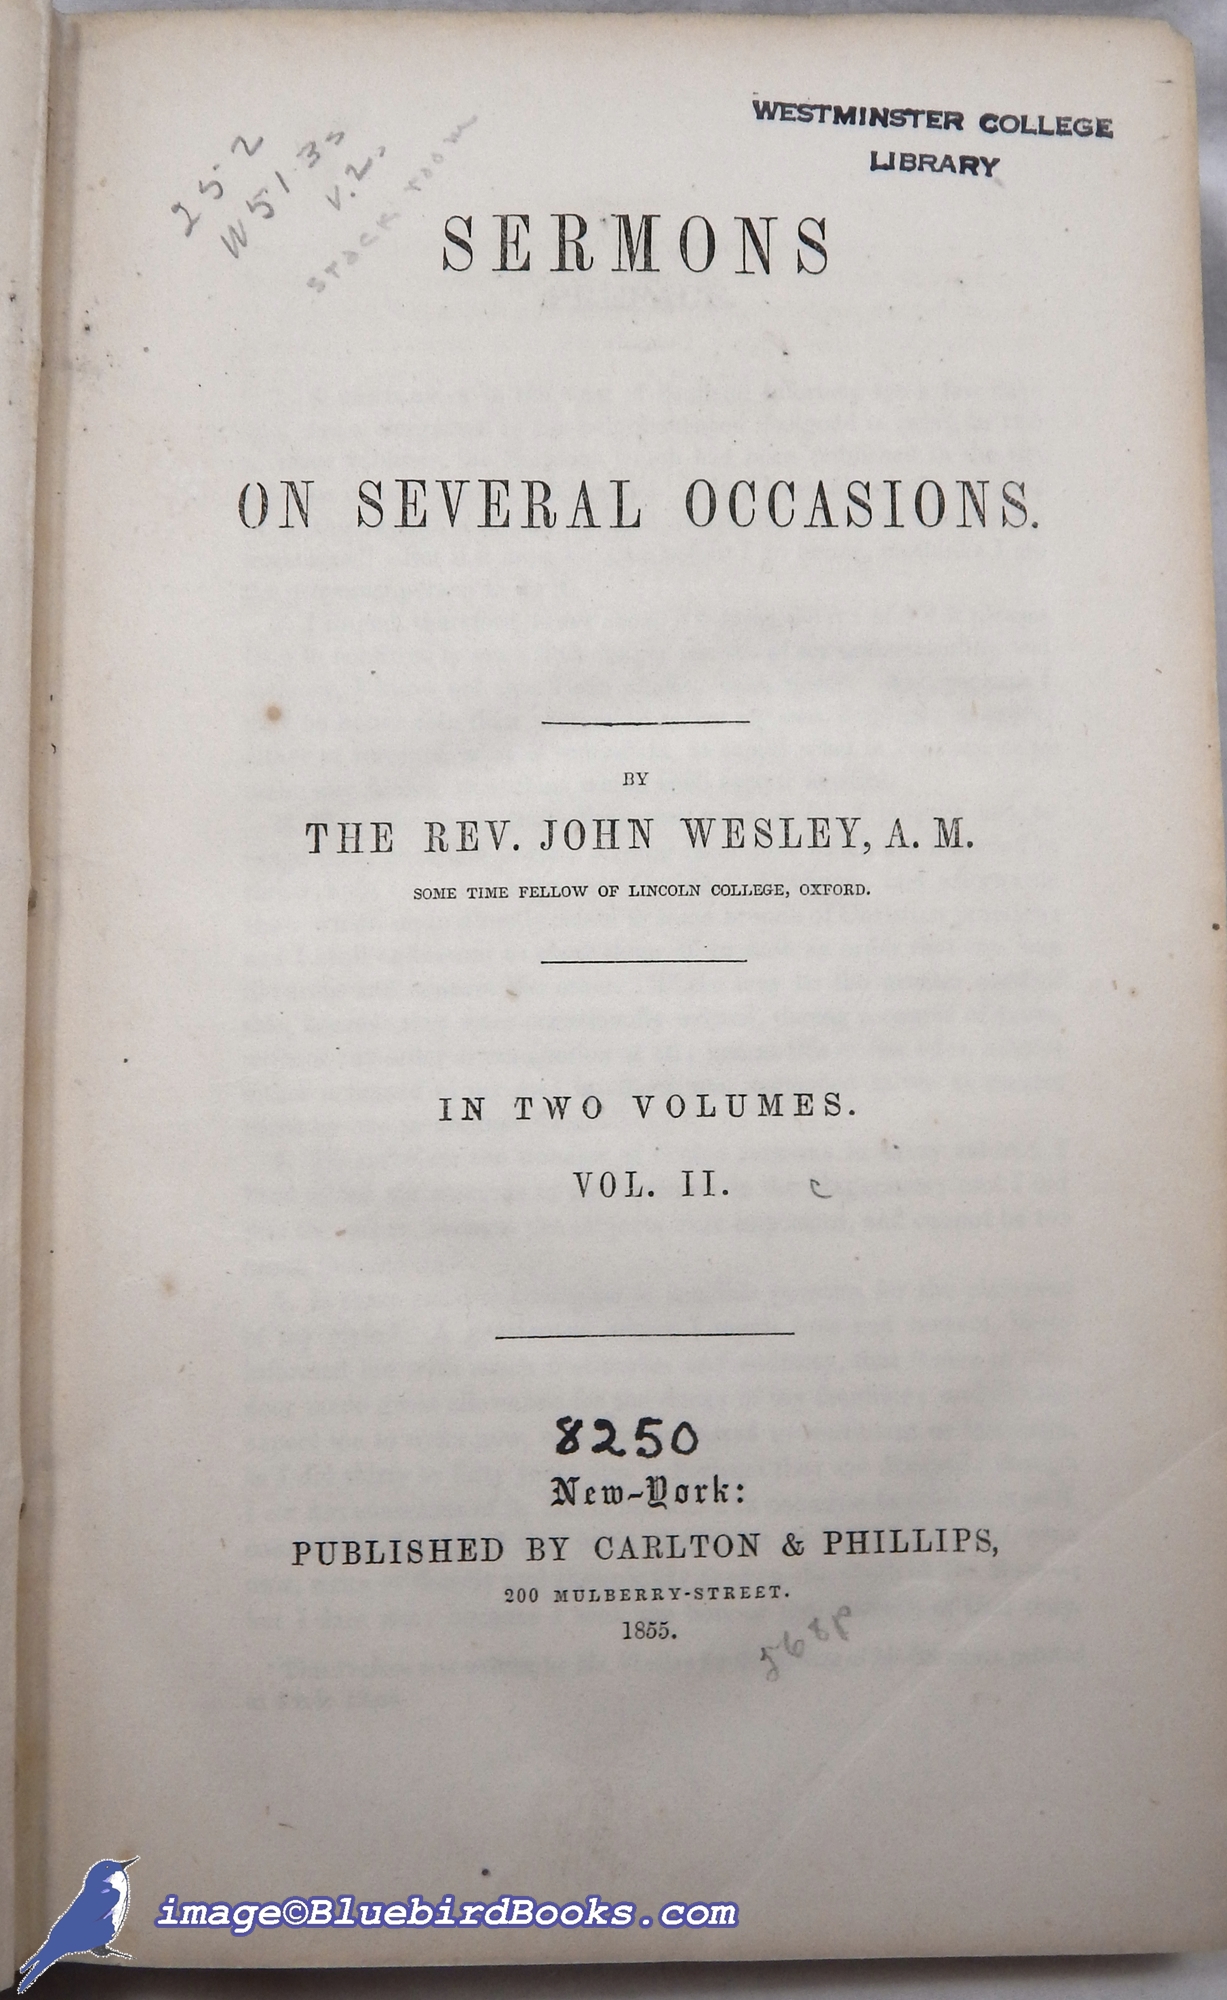 WESLEY, REV. JOHN - Sermons on Several Occasions, in Two Volumes (Volume II Only)